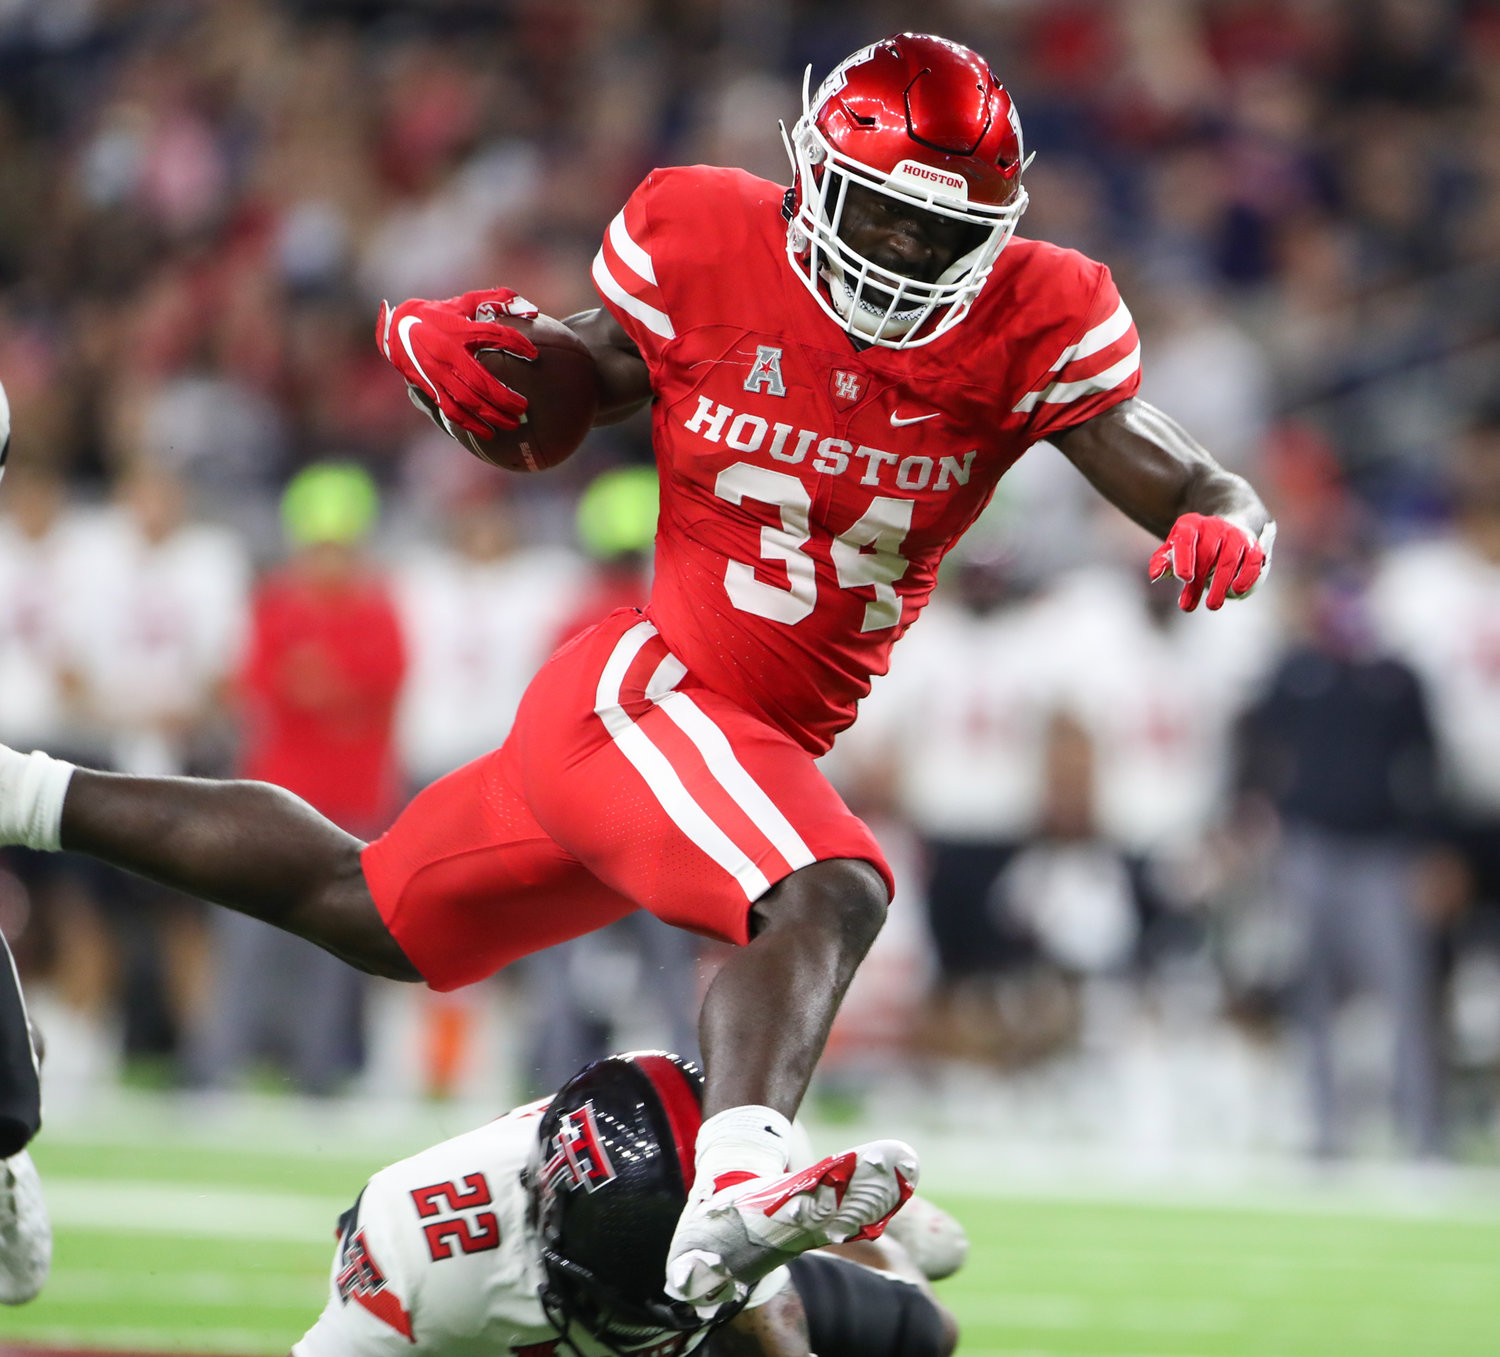 Houston Cougars running back Mulbah Car (34) carries the ball during an NCAA football game between Houston and Texas Tech on September 4, 2021 in Houston, Texas.